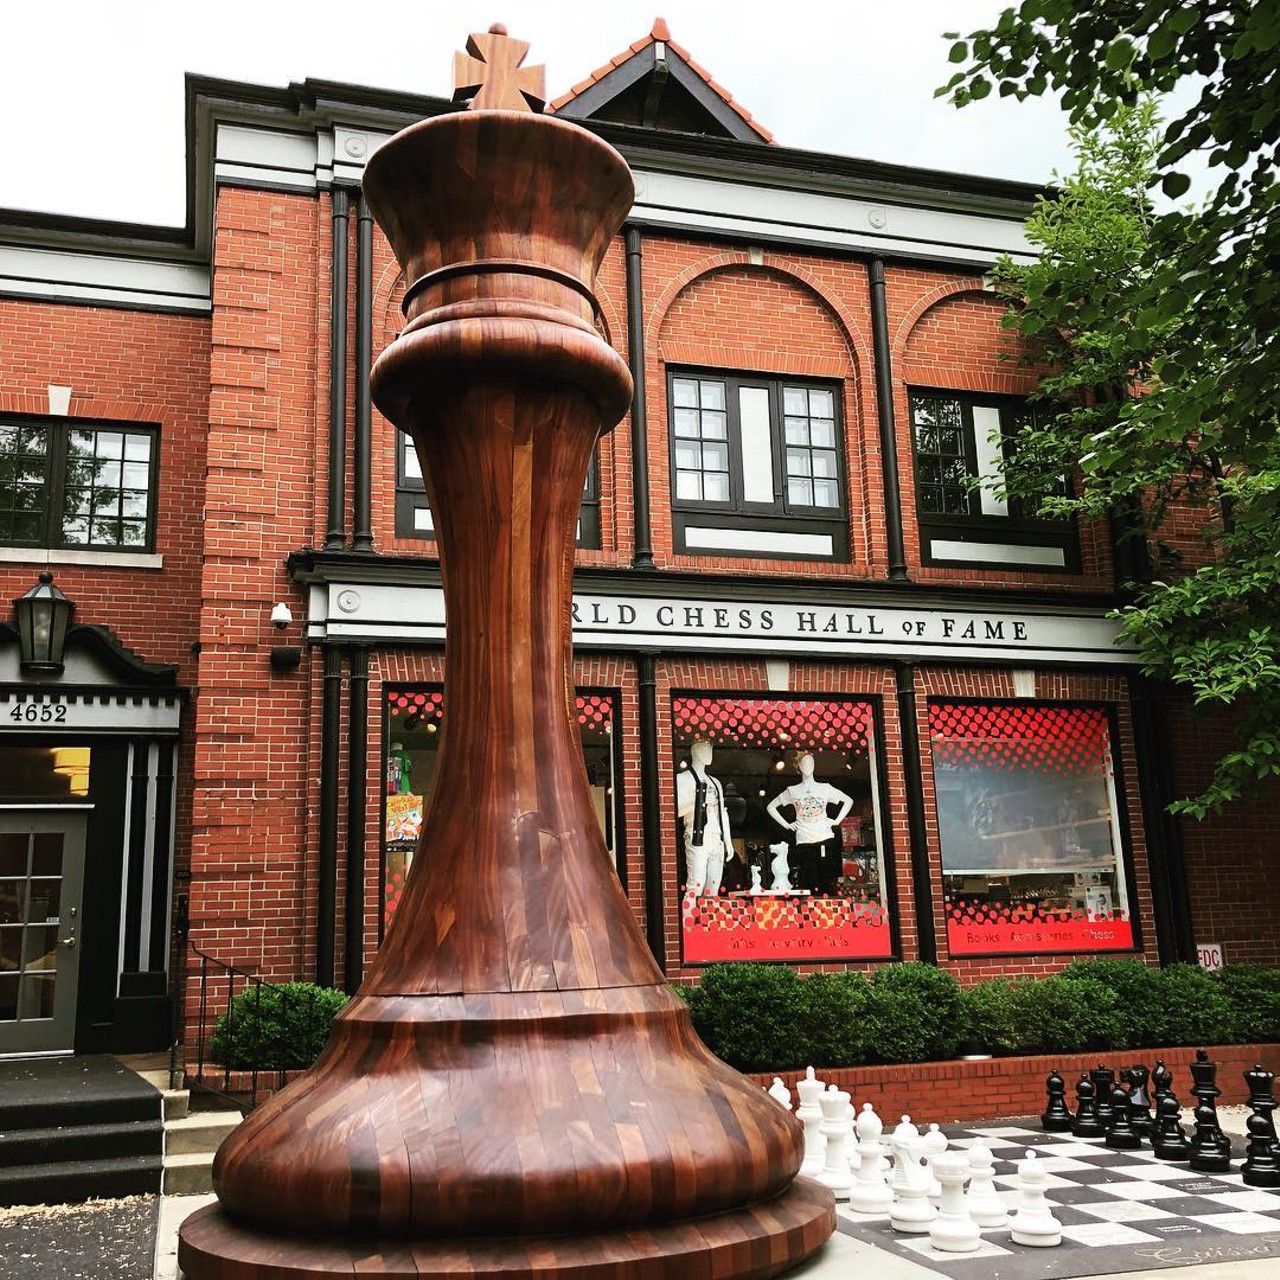 World's Largest Chess Piece
4652 Maryland Ave., St. Louis, MO
The World Chess Hall of Fame lives right in our own Central West End neighborhood. This world-class attraction is a pilgrimage site for chess addicts, who all stop to take their photo by this, the World's Largest Chess Piece.
Photo courtesy of itsjustclay / Instagram